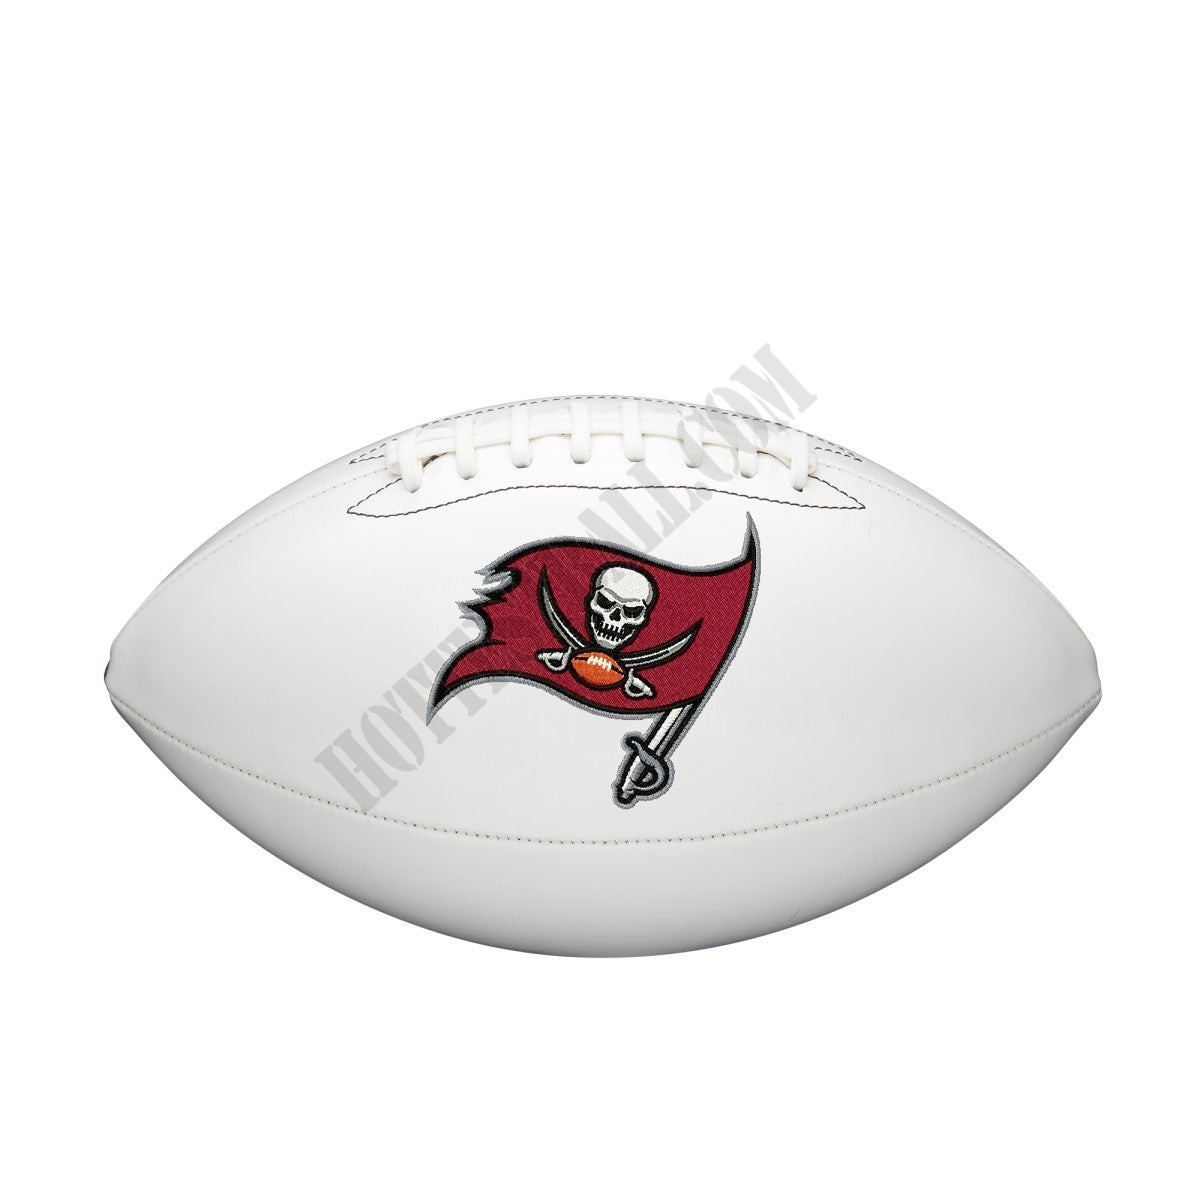 NFL Live Signature Autograph Football - Tampa Bay Buccaneers ● Wilson Promotions - -0